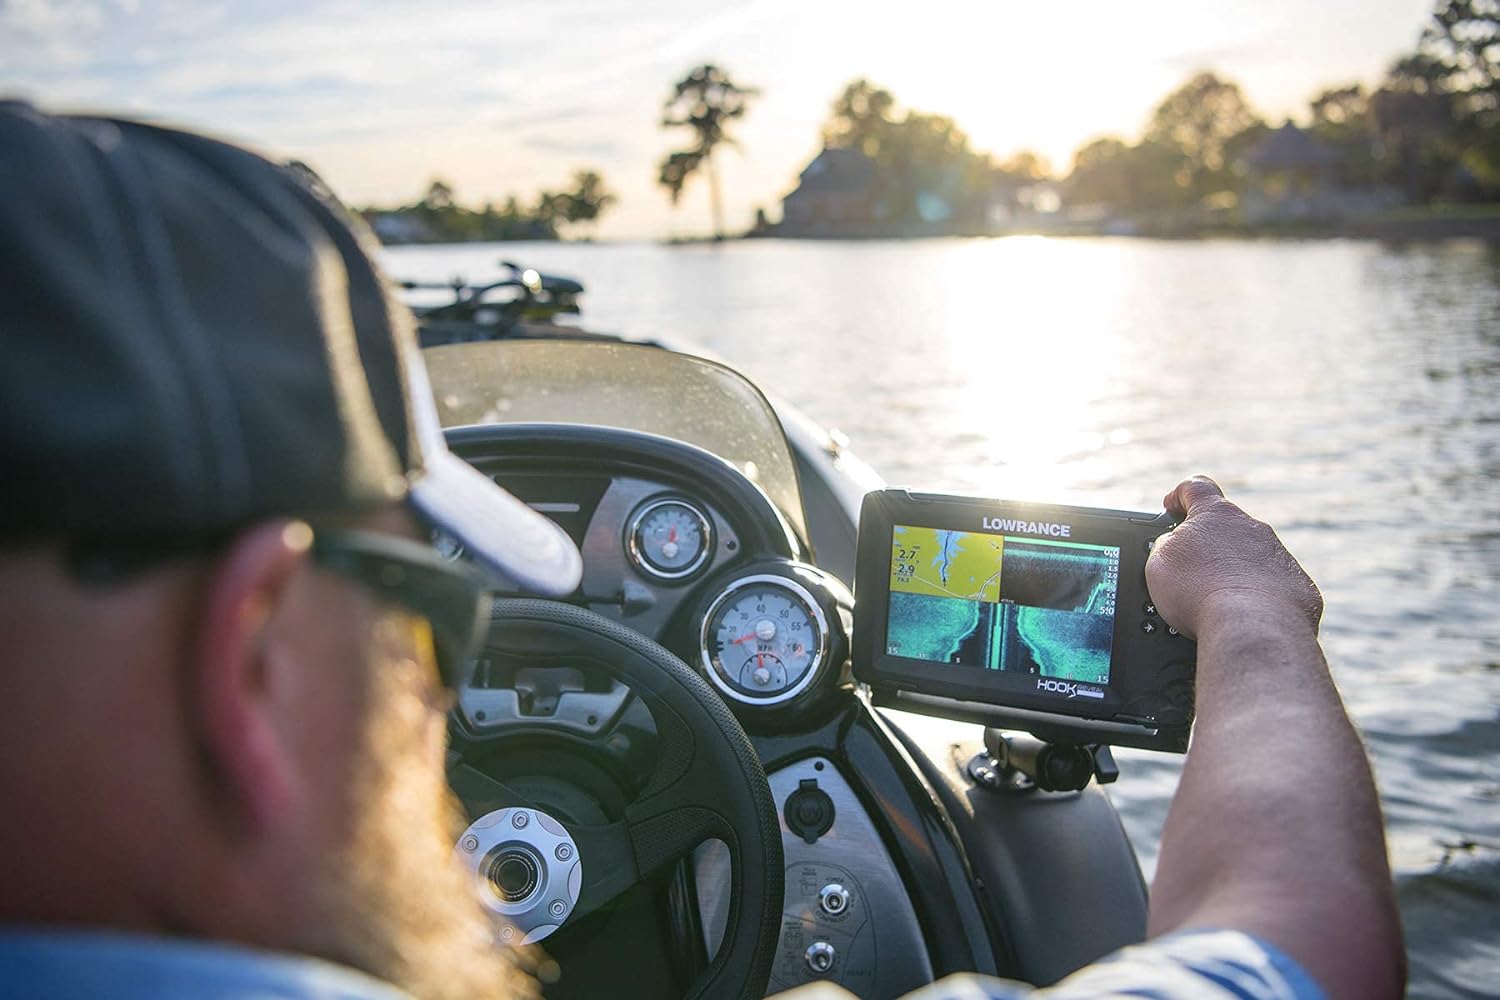 Lowrance Hook Reveal 5 Fish Finder - 5 Inch Screen with Transducer and C-MAP Preloaded Map Options (Renewed)